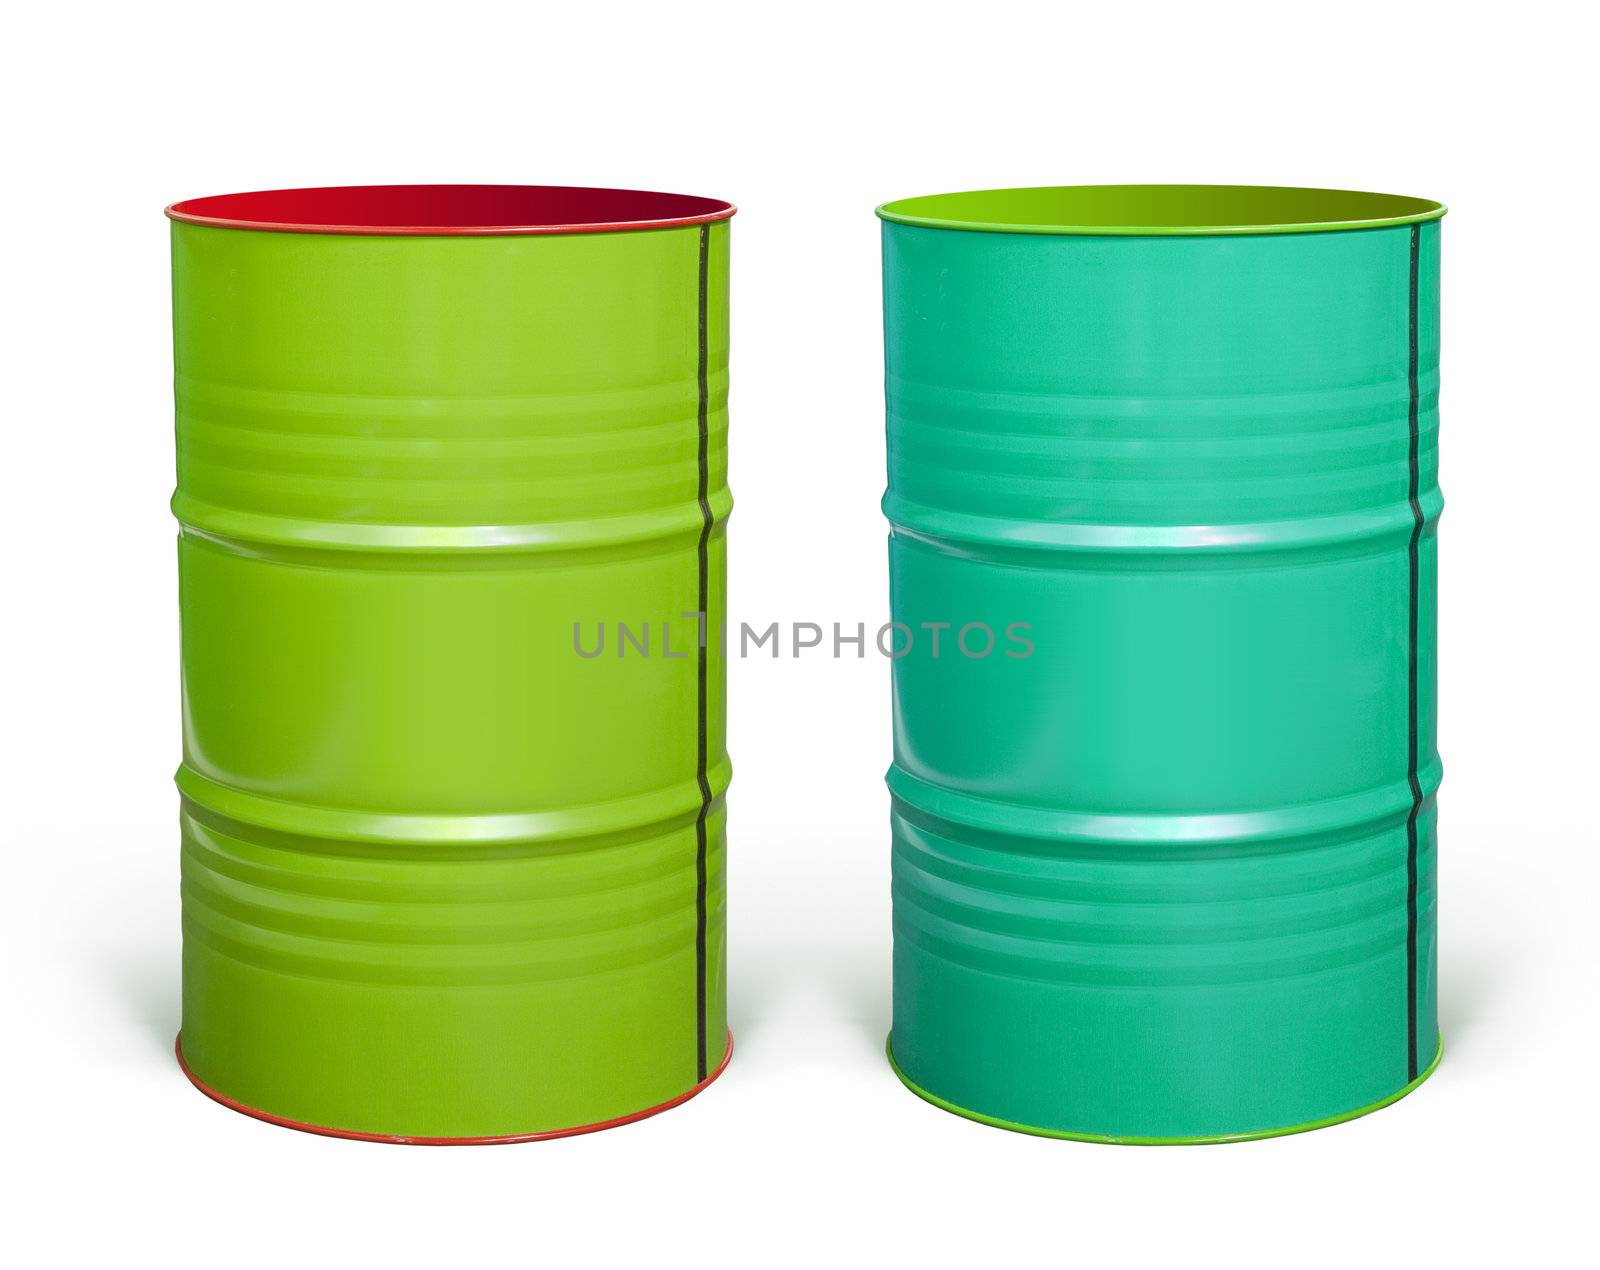 two coloured steel barrels on white background with paths